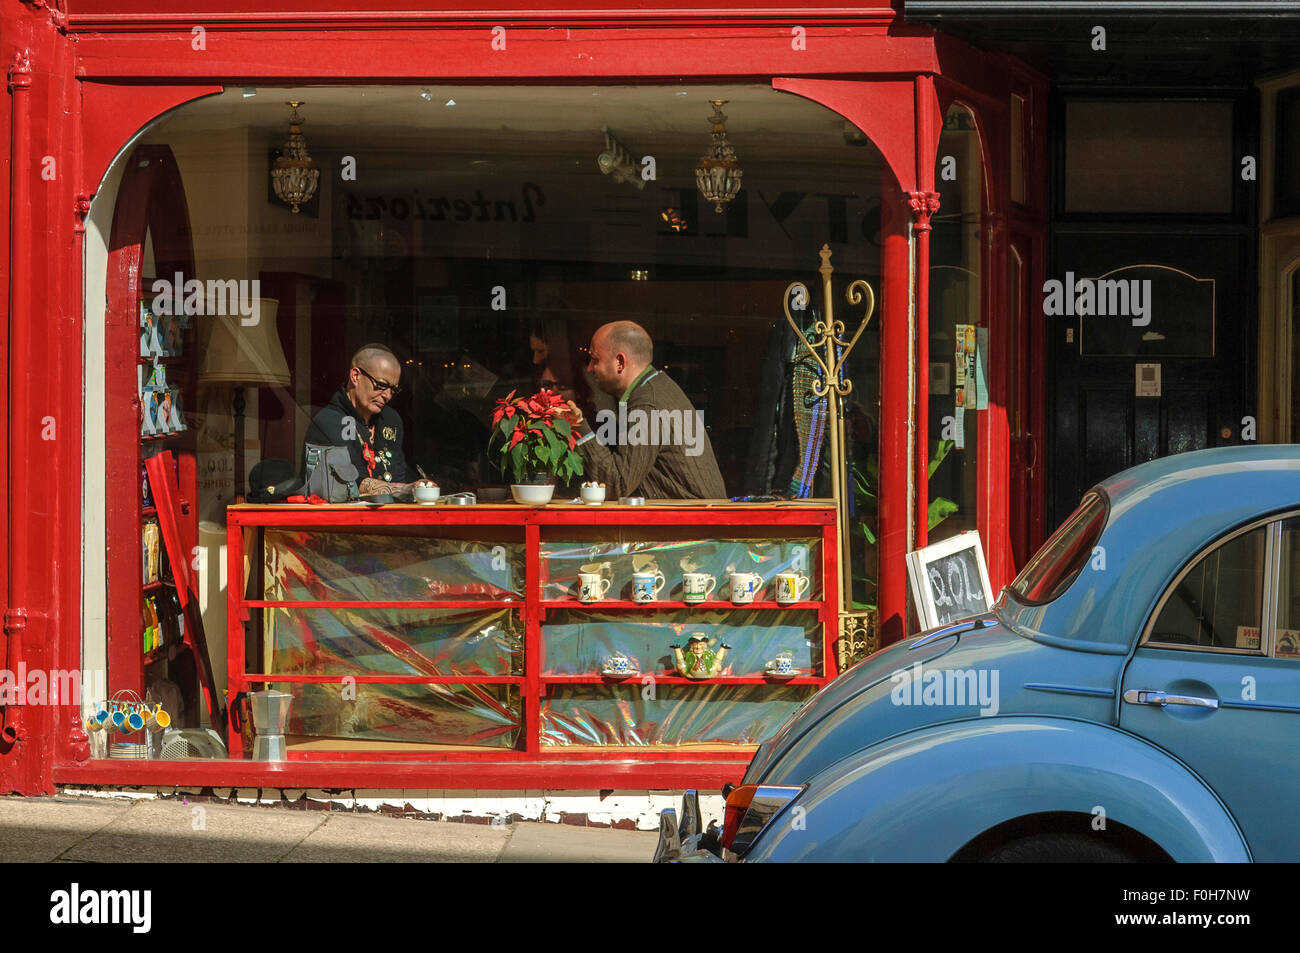 Cafe society. St Leonards on Sea. Hastings. East Sussex. UK Banque D'Images